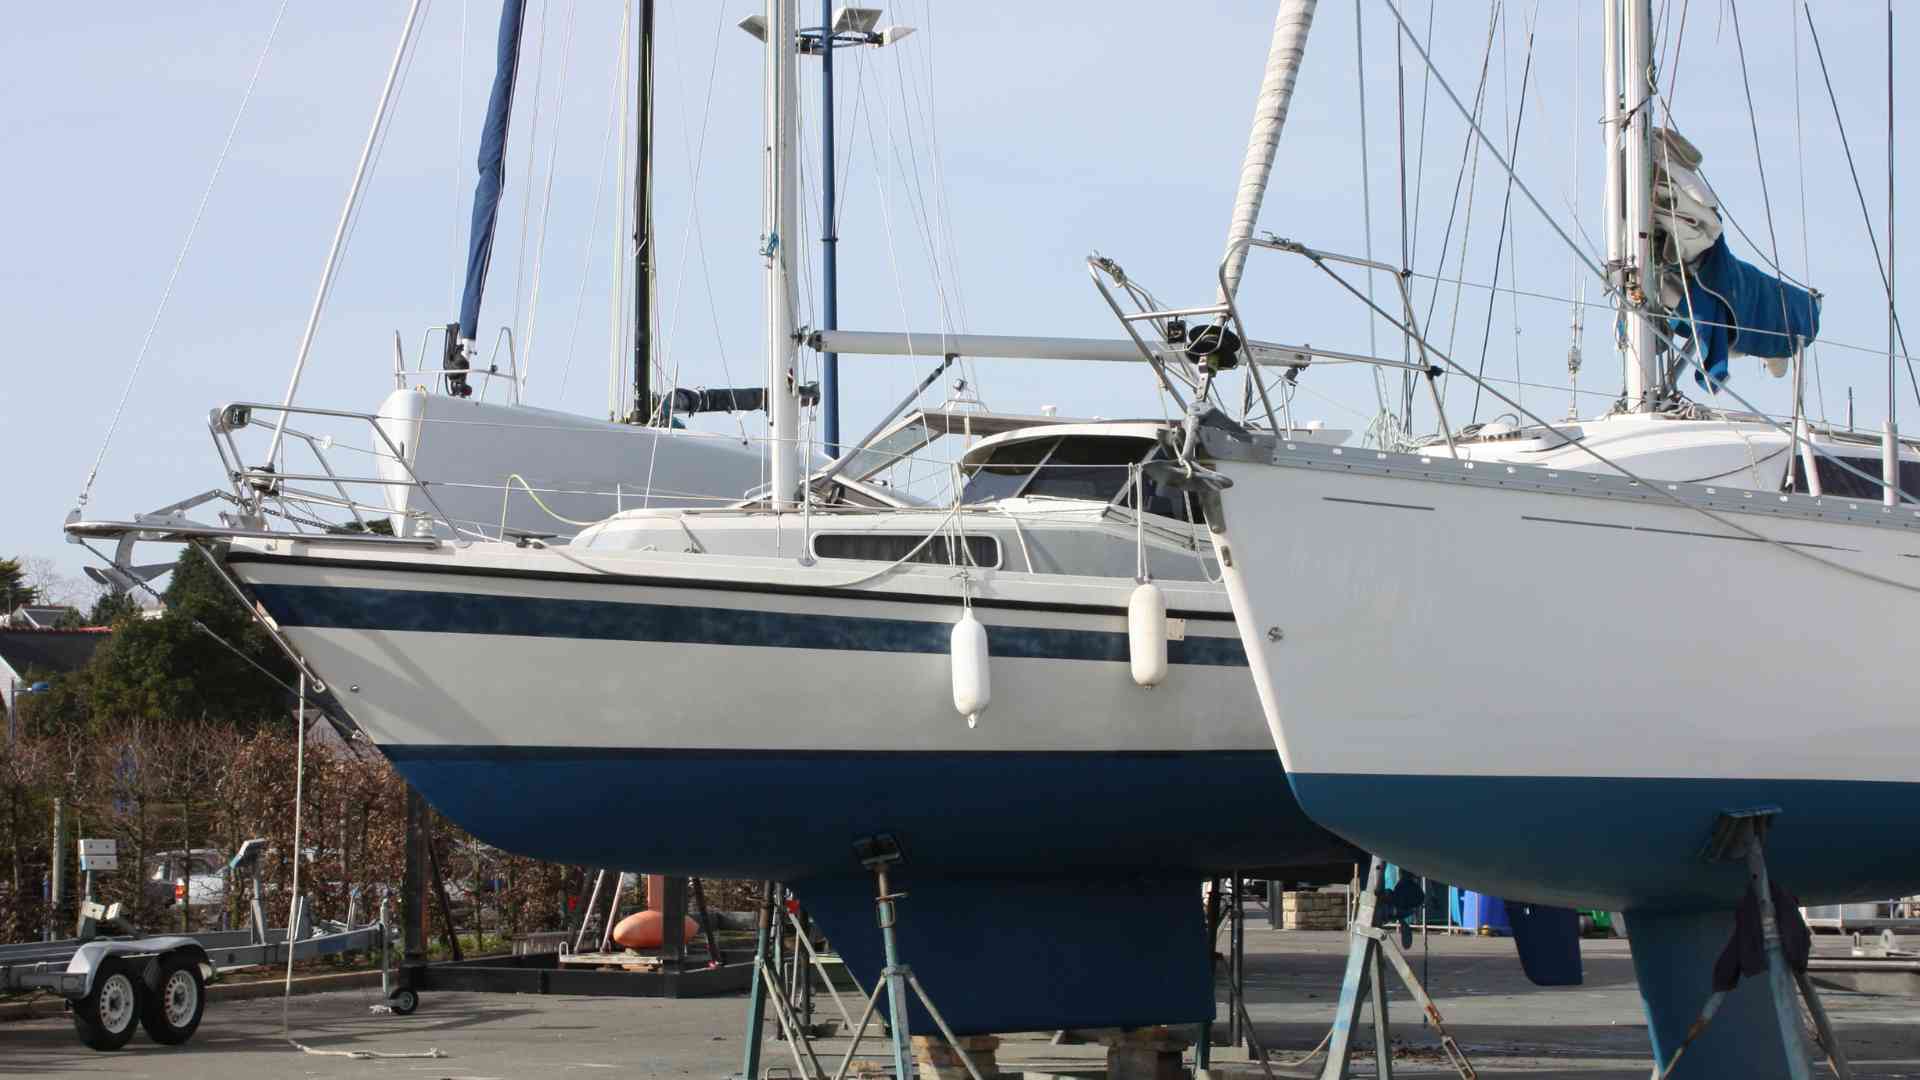 How can I troubleshoot issues with my boat_s electrical system